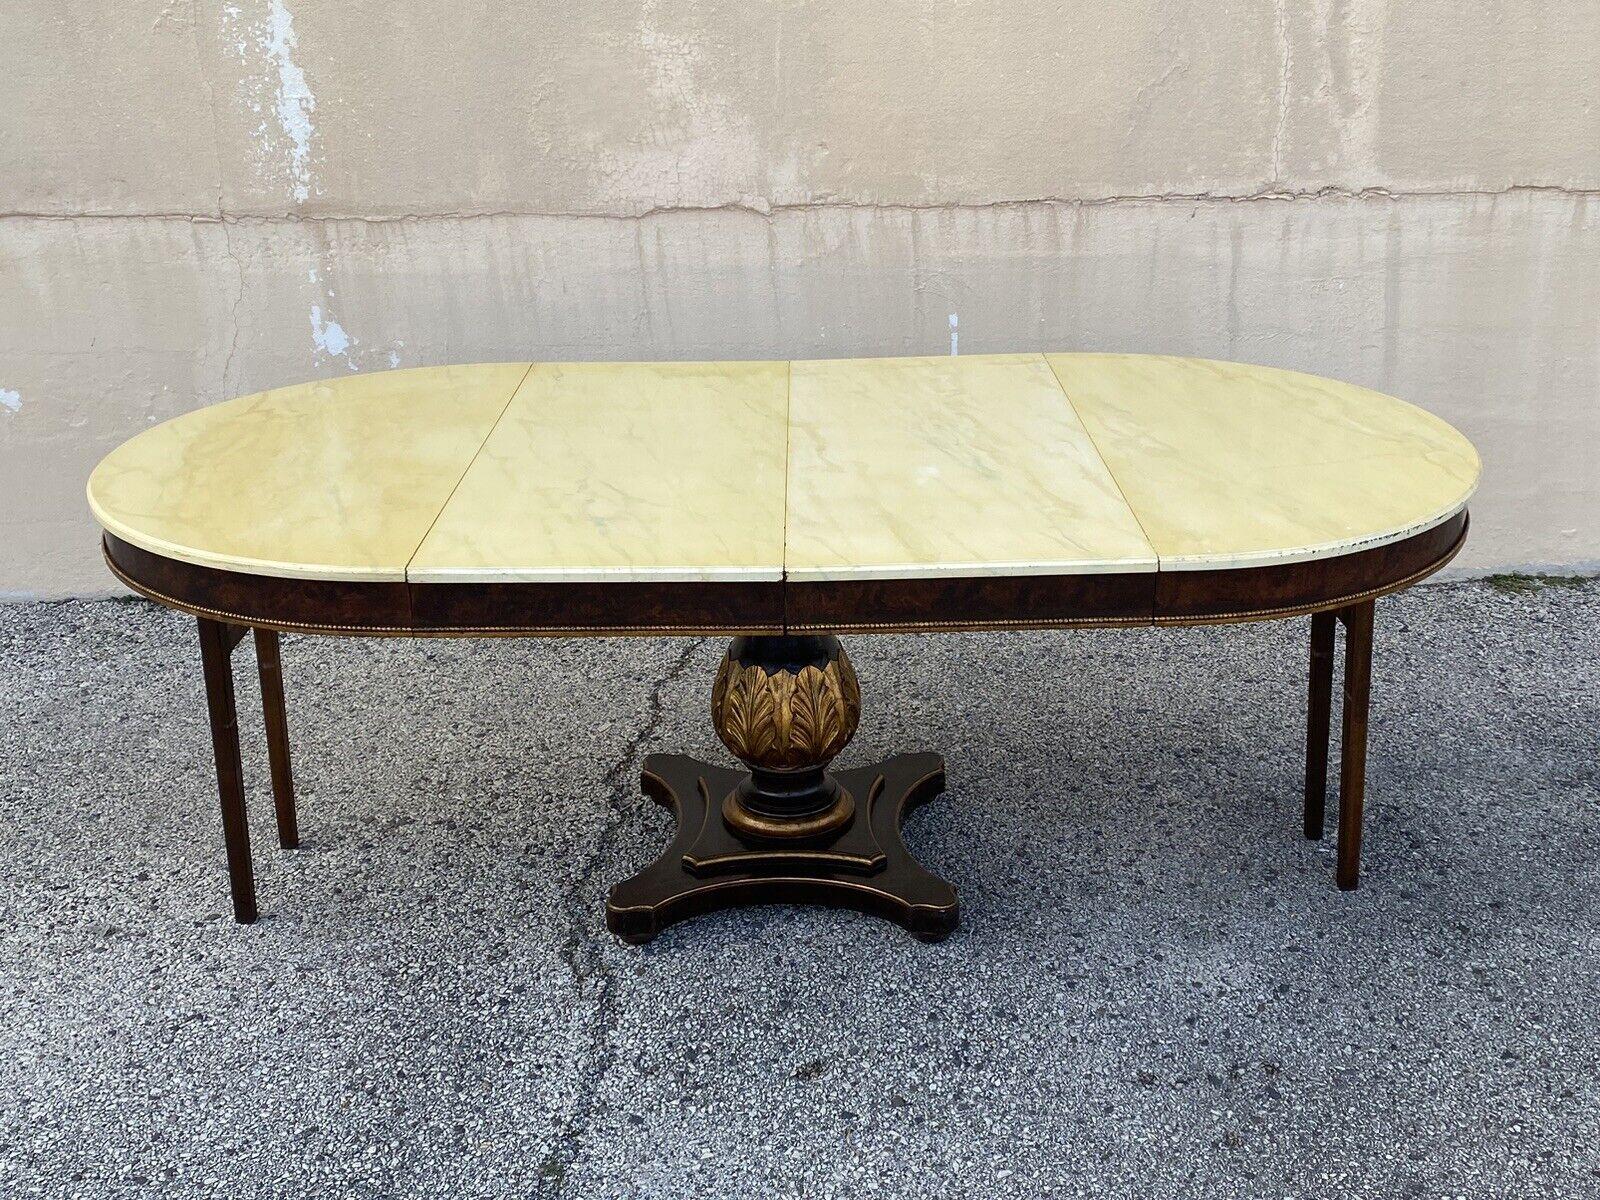 Vintage Italian Regency Style Pedestal Base Round Dining Table Cream Lacquer Top In Good Condition For Sale In Philadelphia, PA